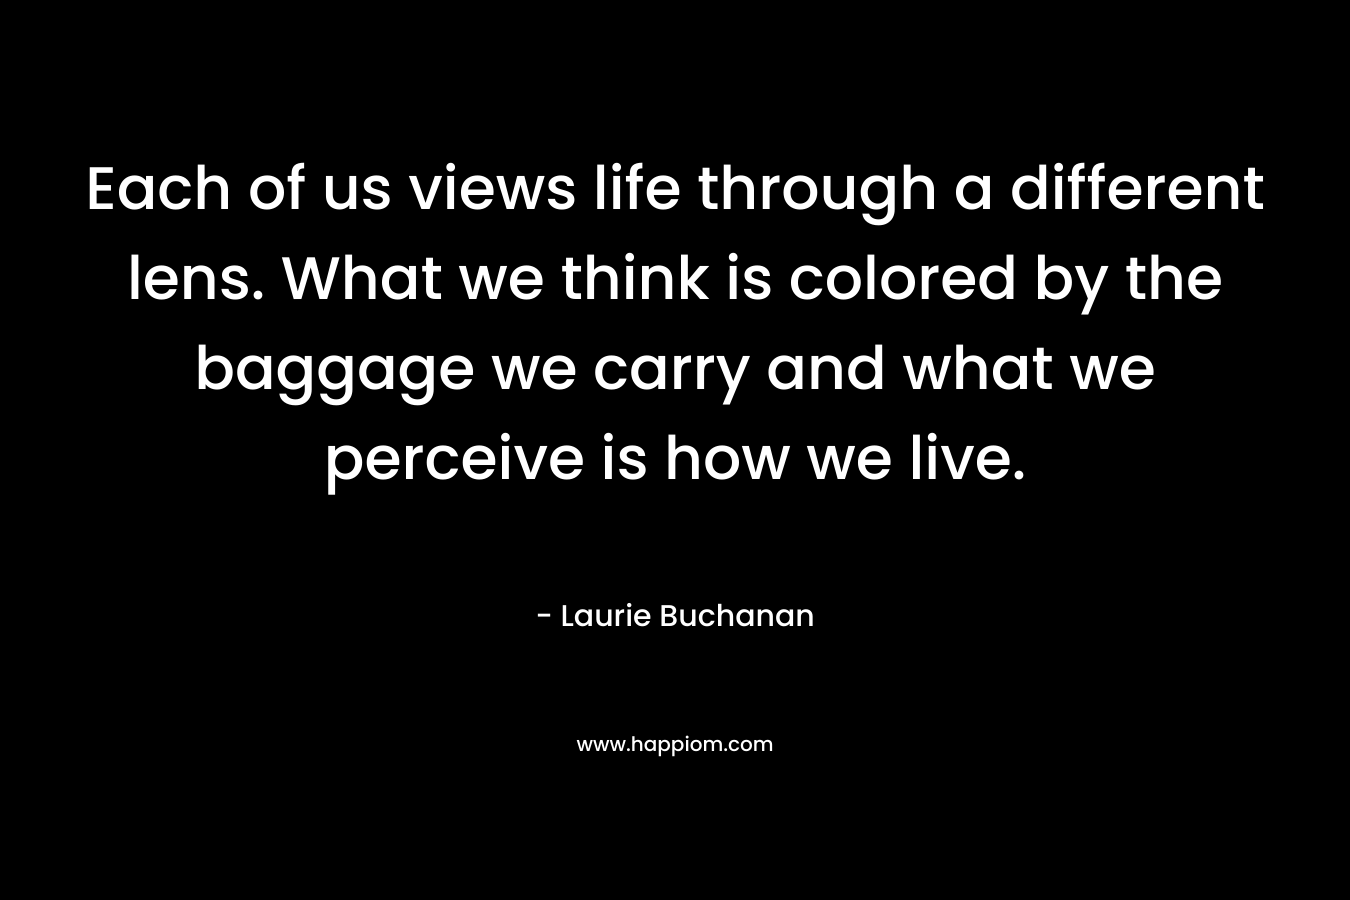 Each of us views life through a different lens. What we think is colored by the baggage we carry and what we perceive is how we live. – Laurie Buchanan